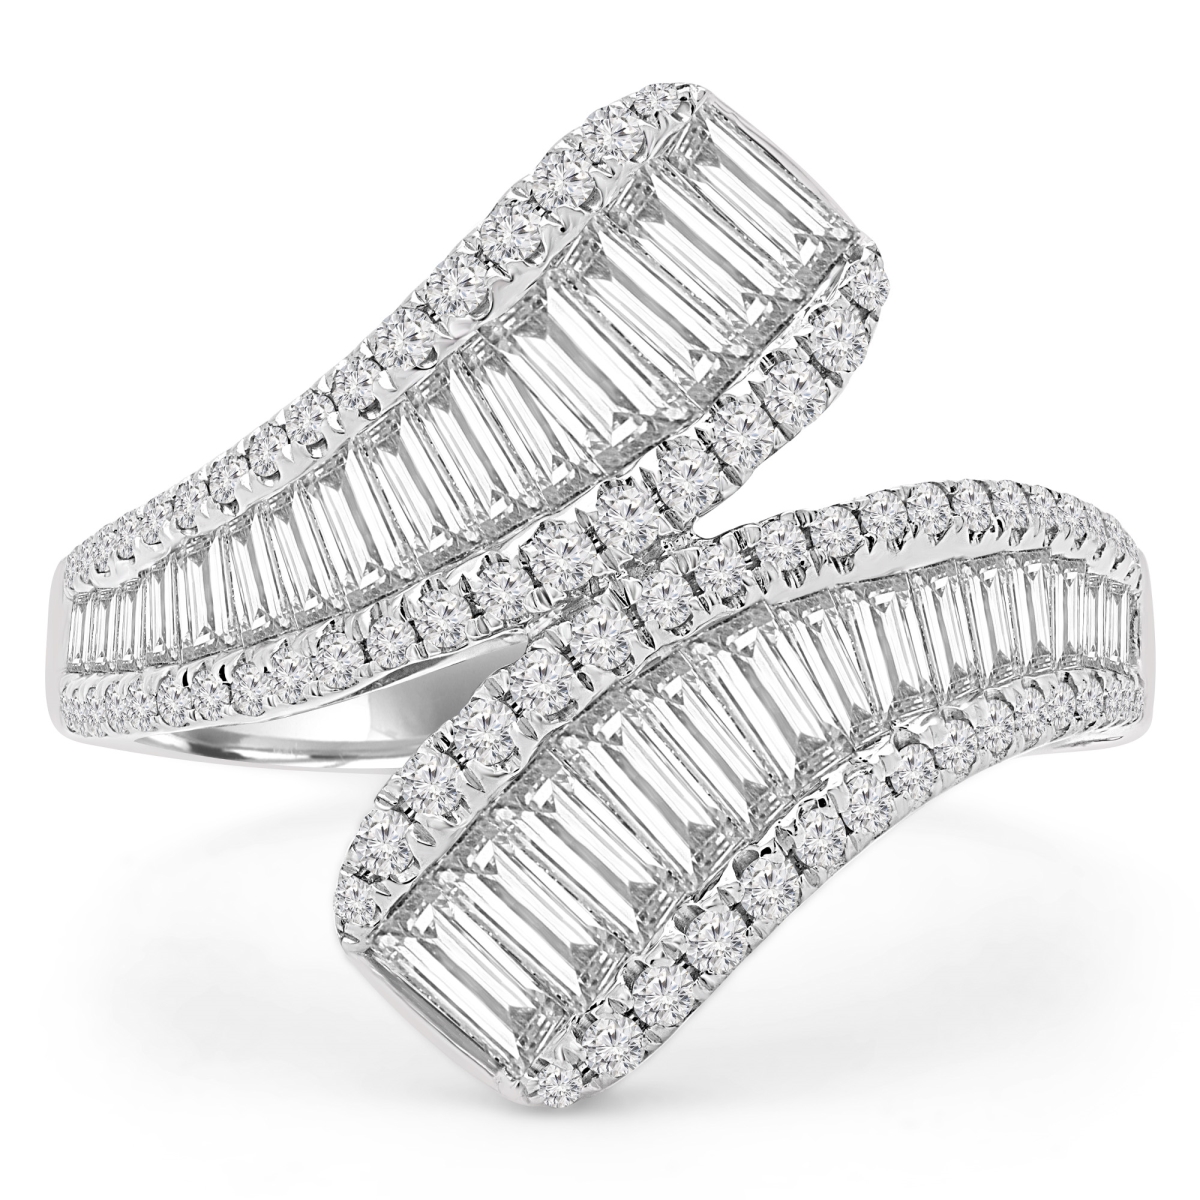 Picture of Majesty Diamonds MD190283-P 1.4 CTW Round Diamond Bypass Cocktail Ring in 18K White Gold